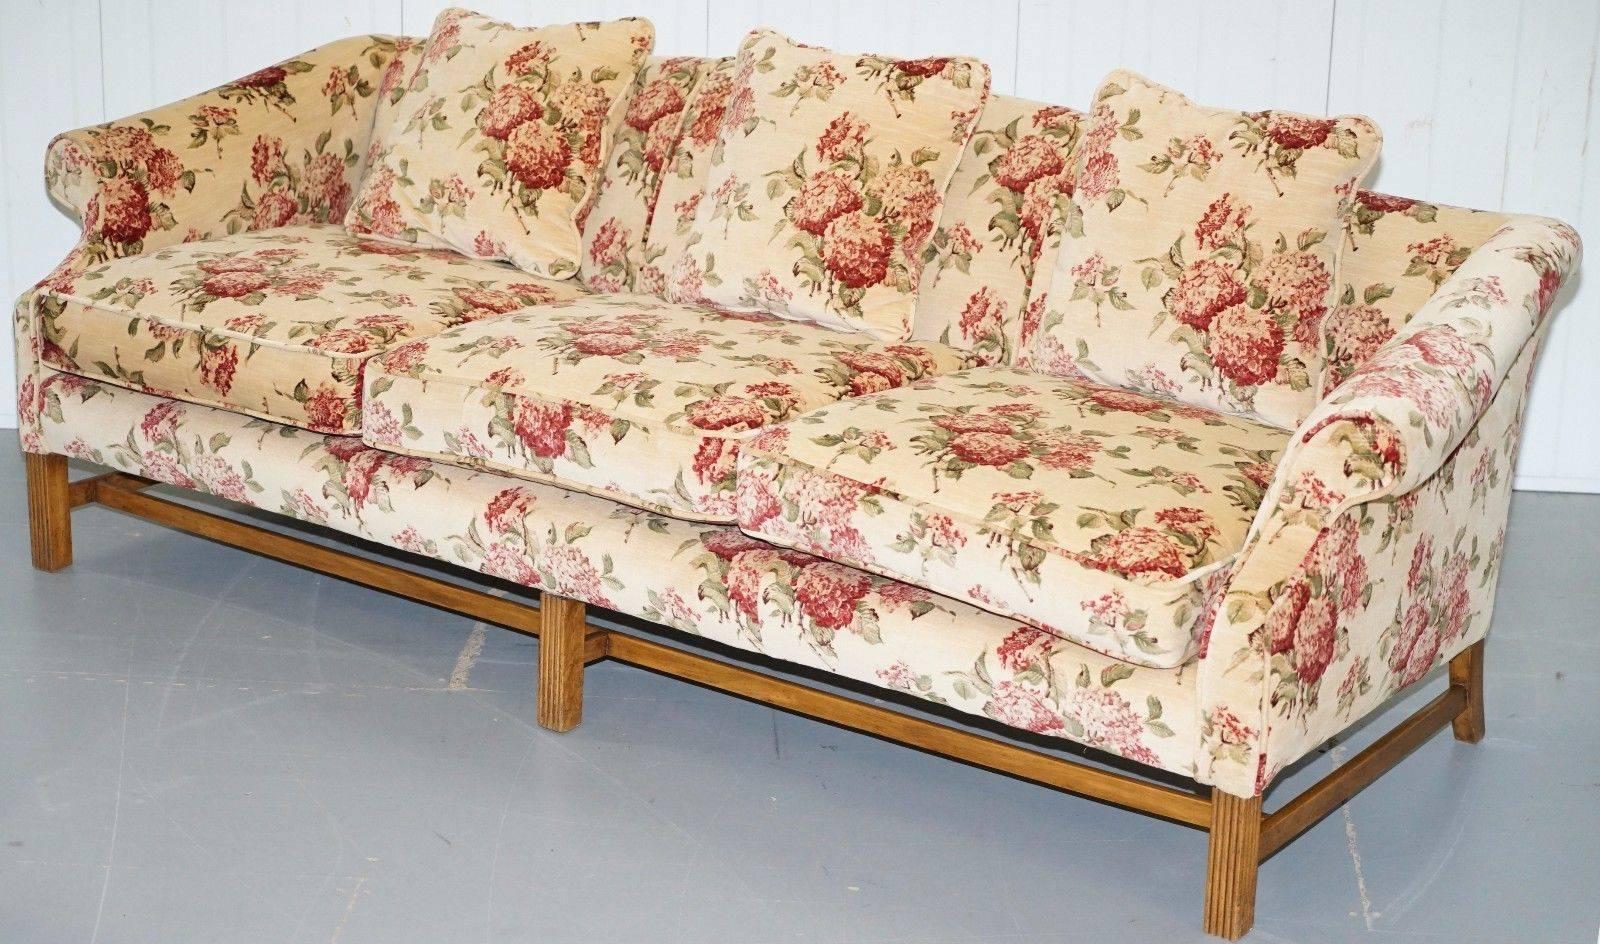 We are delighted to offer for sale this stunning hand made in England Chippendale regency styled Camel / humpback large silk velvet upholstered sofa

A very good looking and well made piece in a traditional English mannor designed by one of the